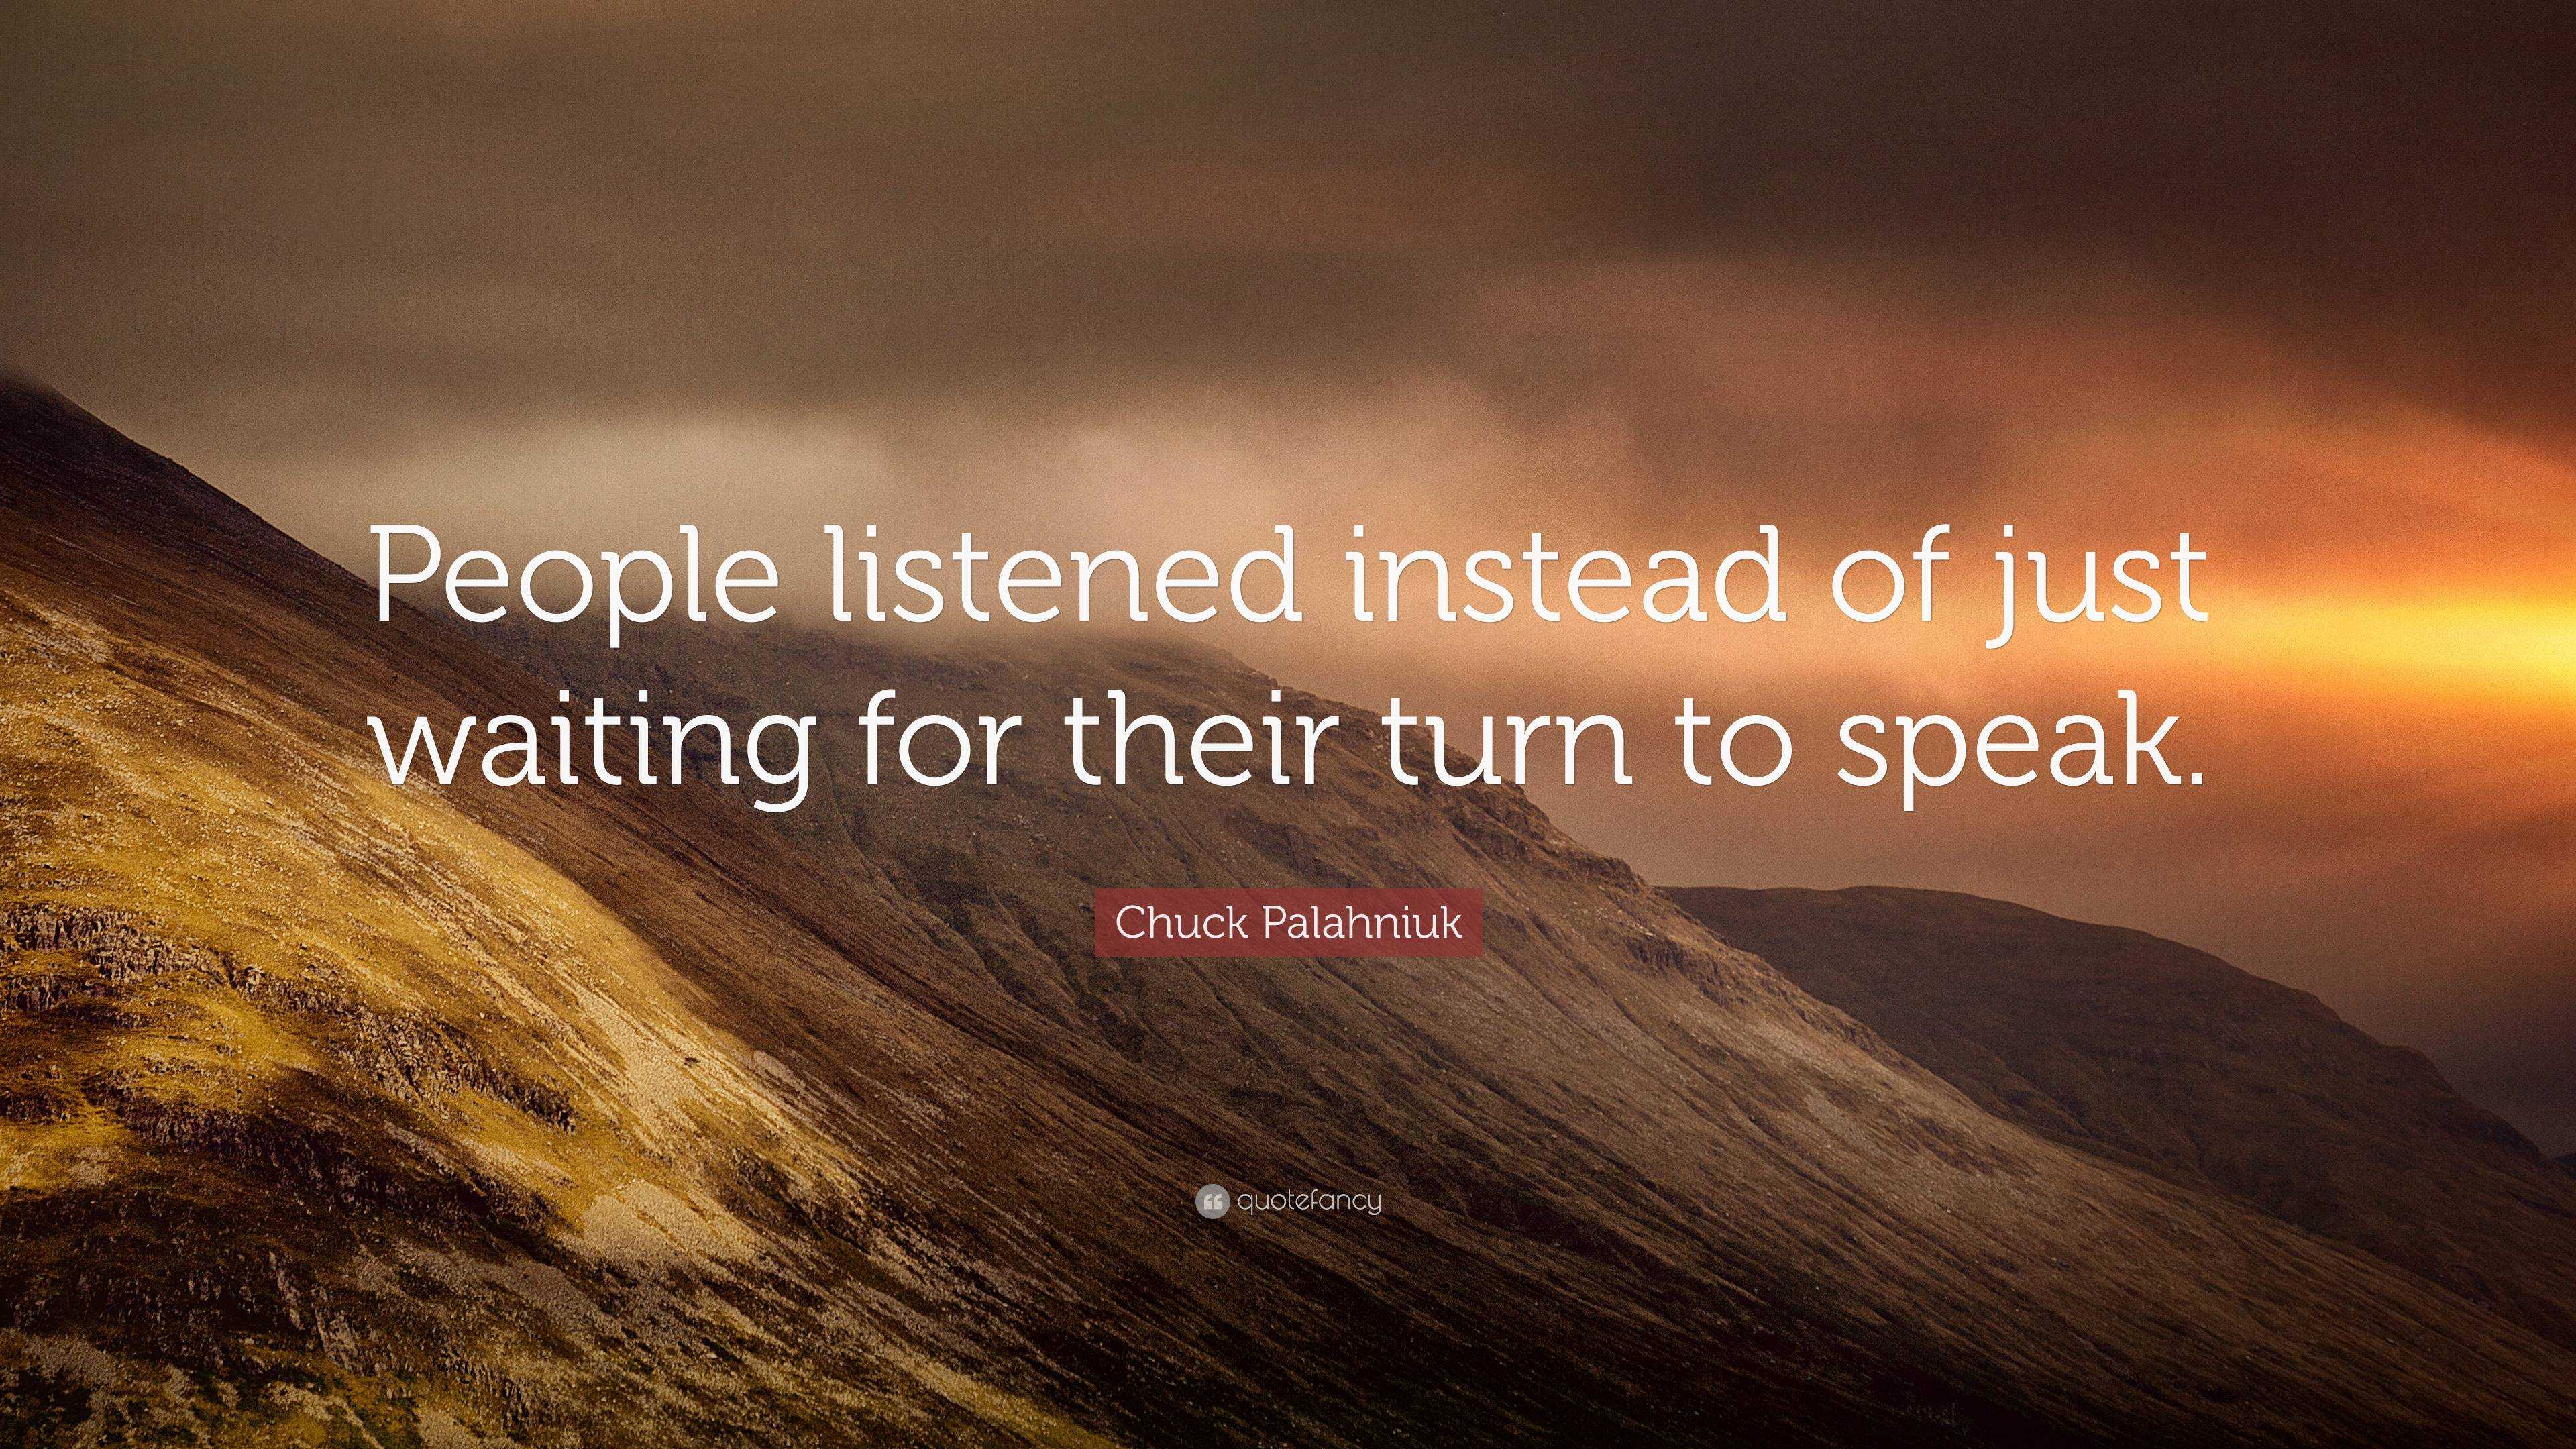 Chuck Palahniuk Quote: “People listened instead of just waiting for ...